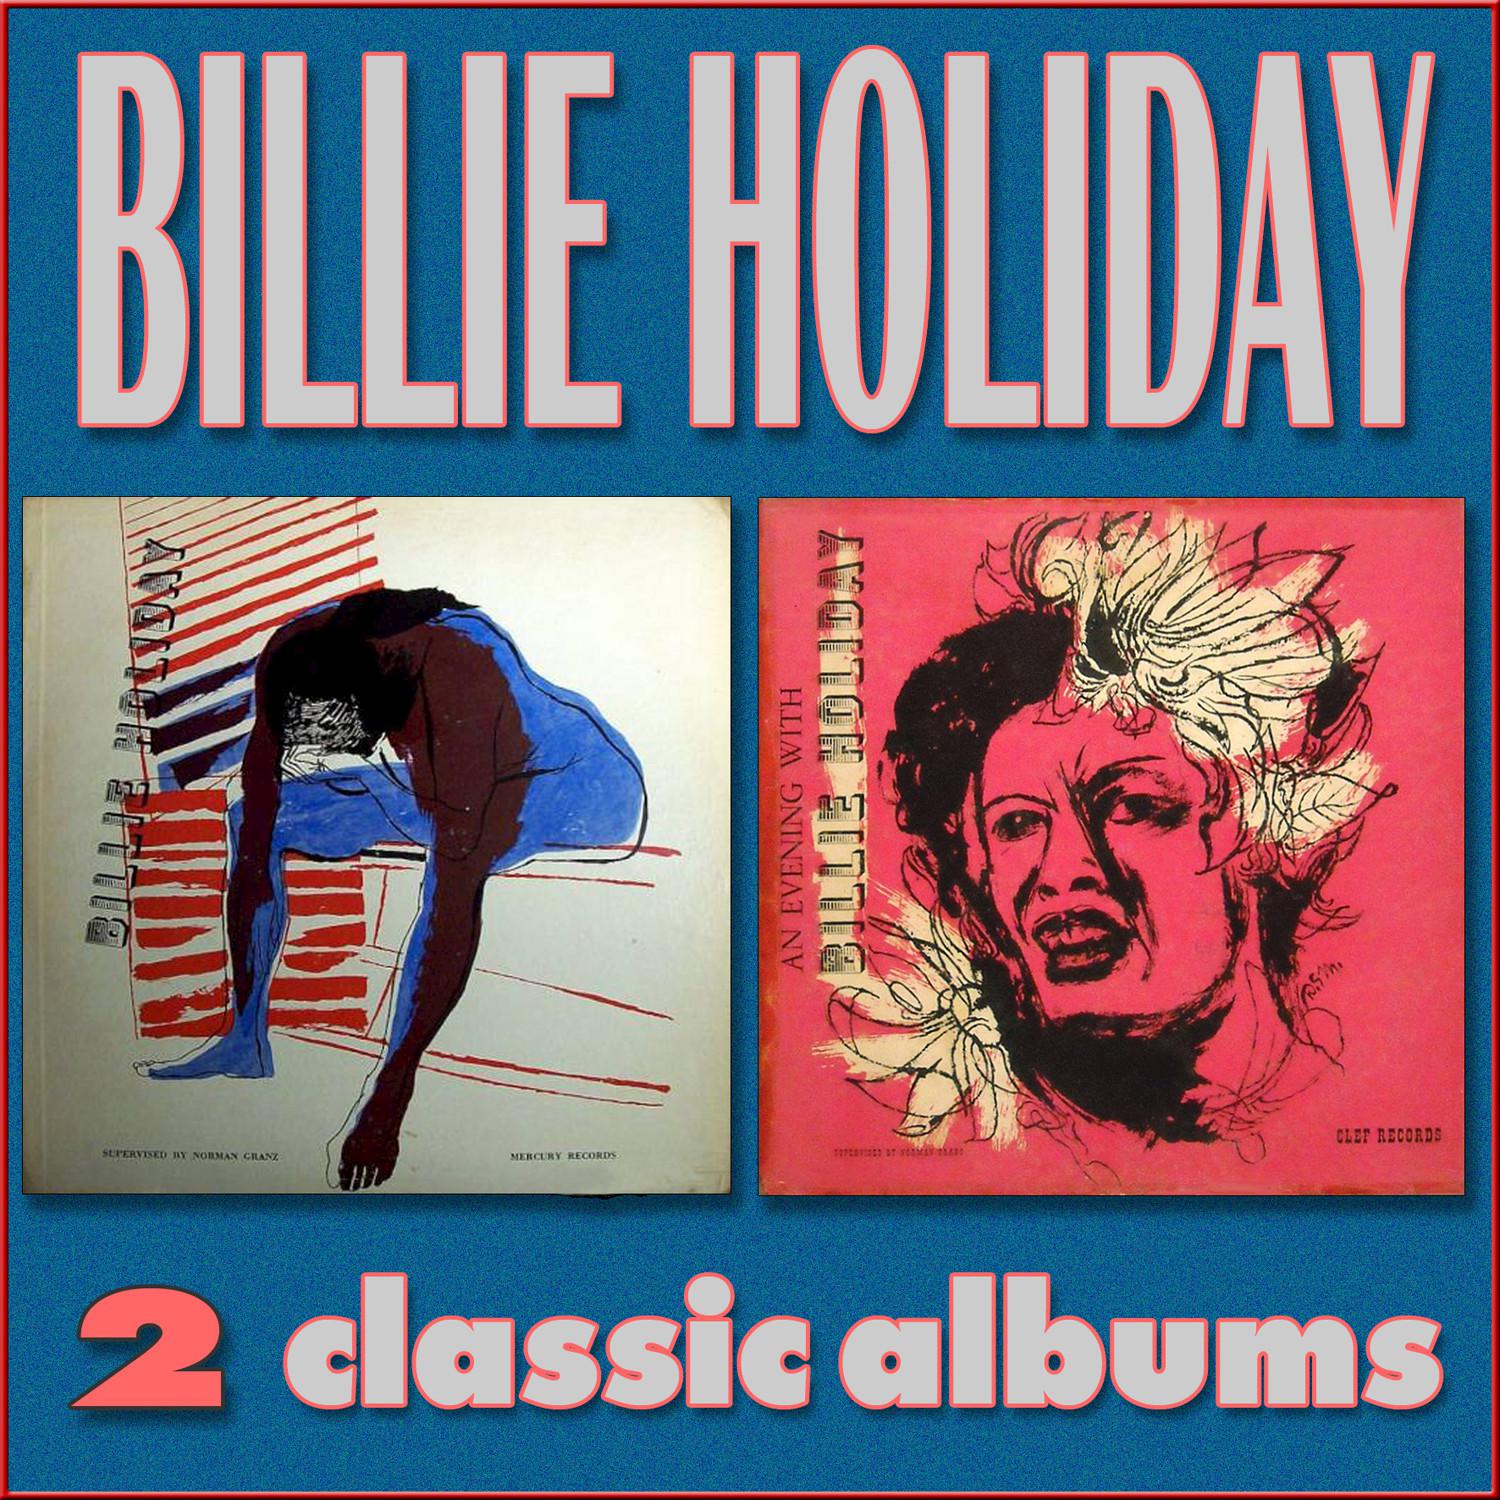 Billie Holiday Sings / An Evening with Billie Holiday